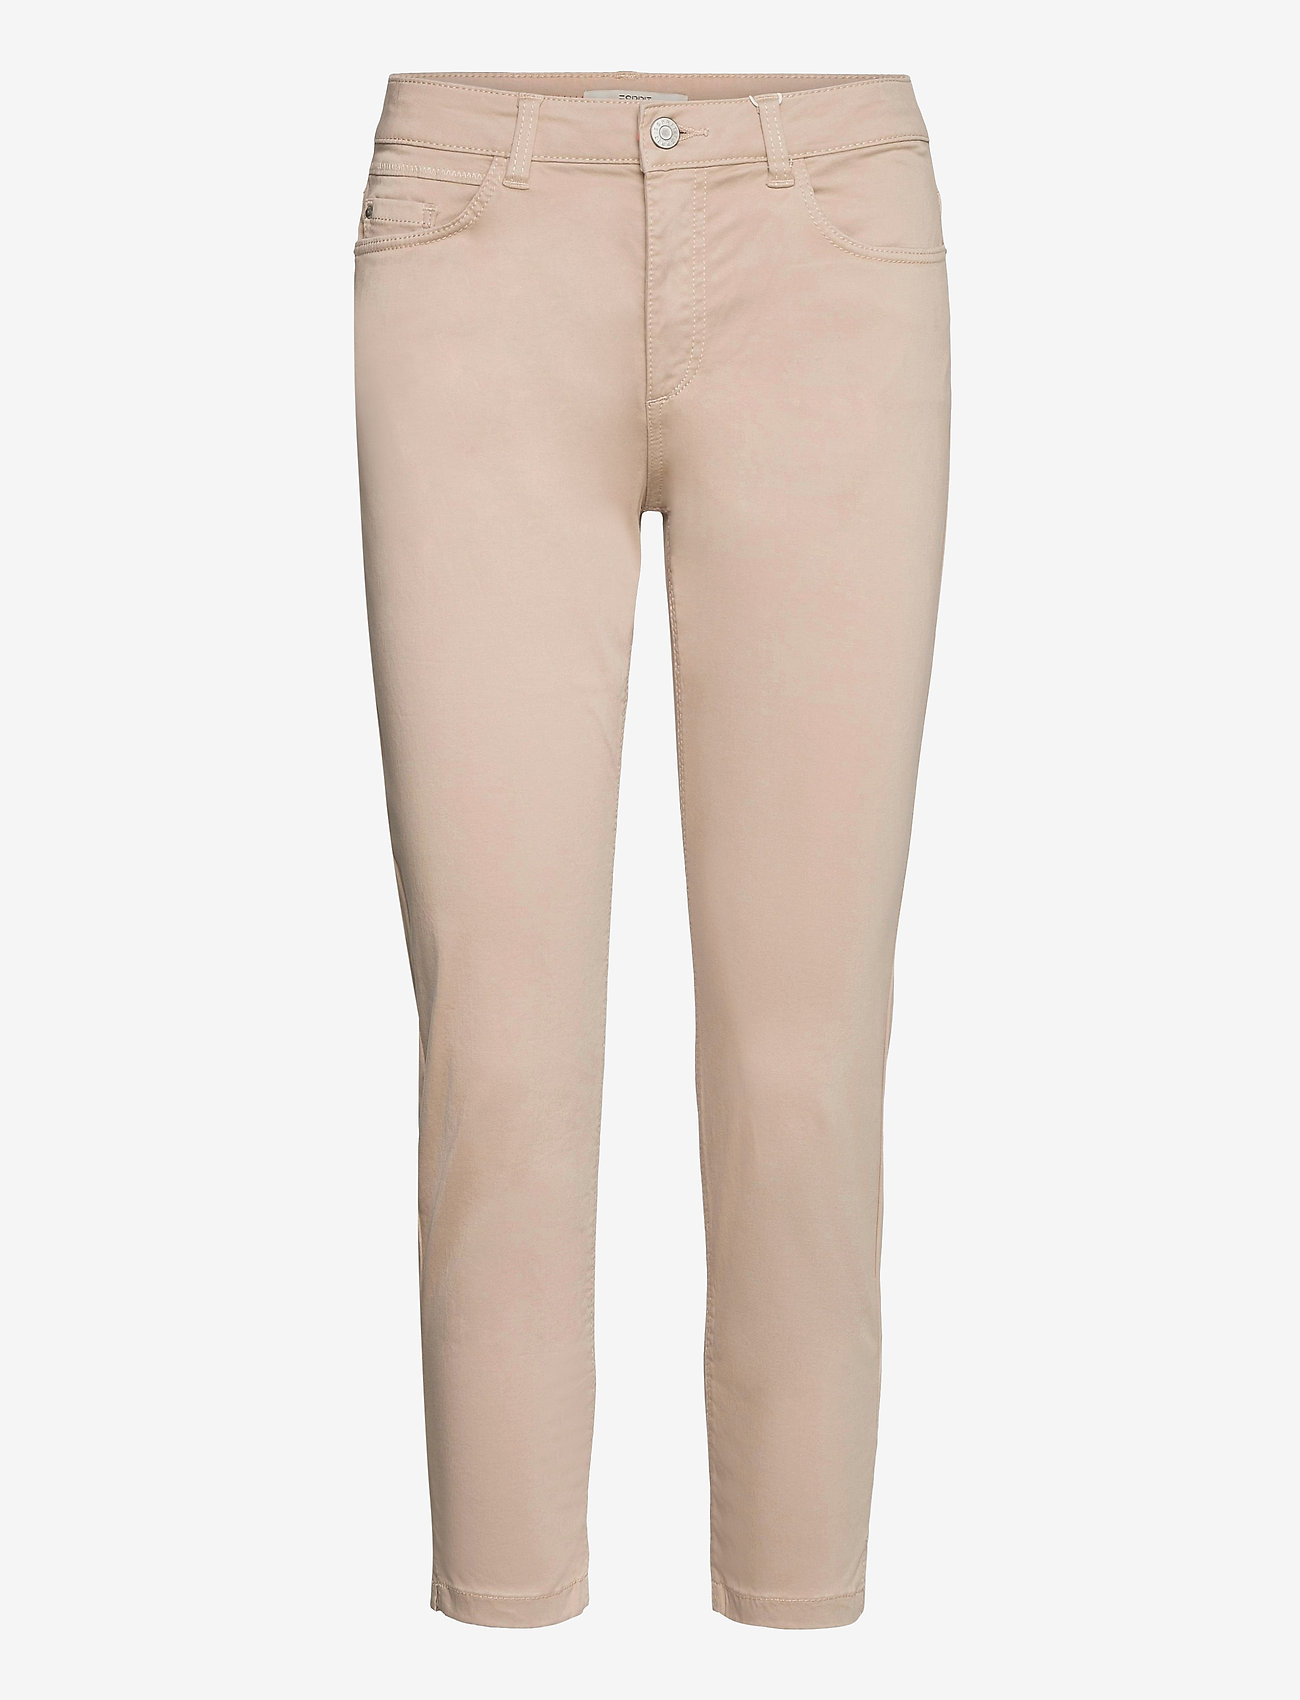 Esprit Casual - Super stretchy and comfy Capri trousers - slim fit trousers - light beige - 0